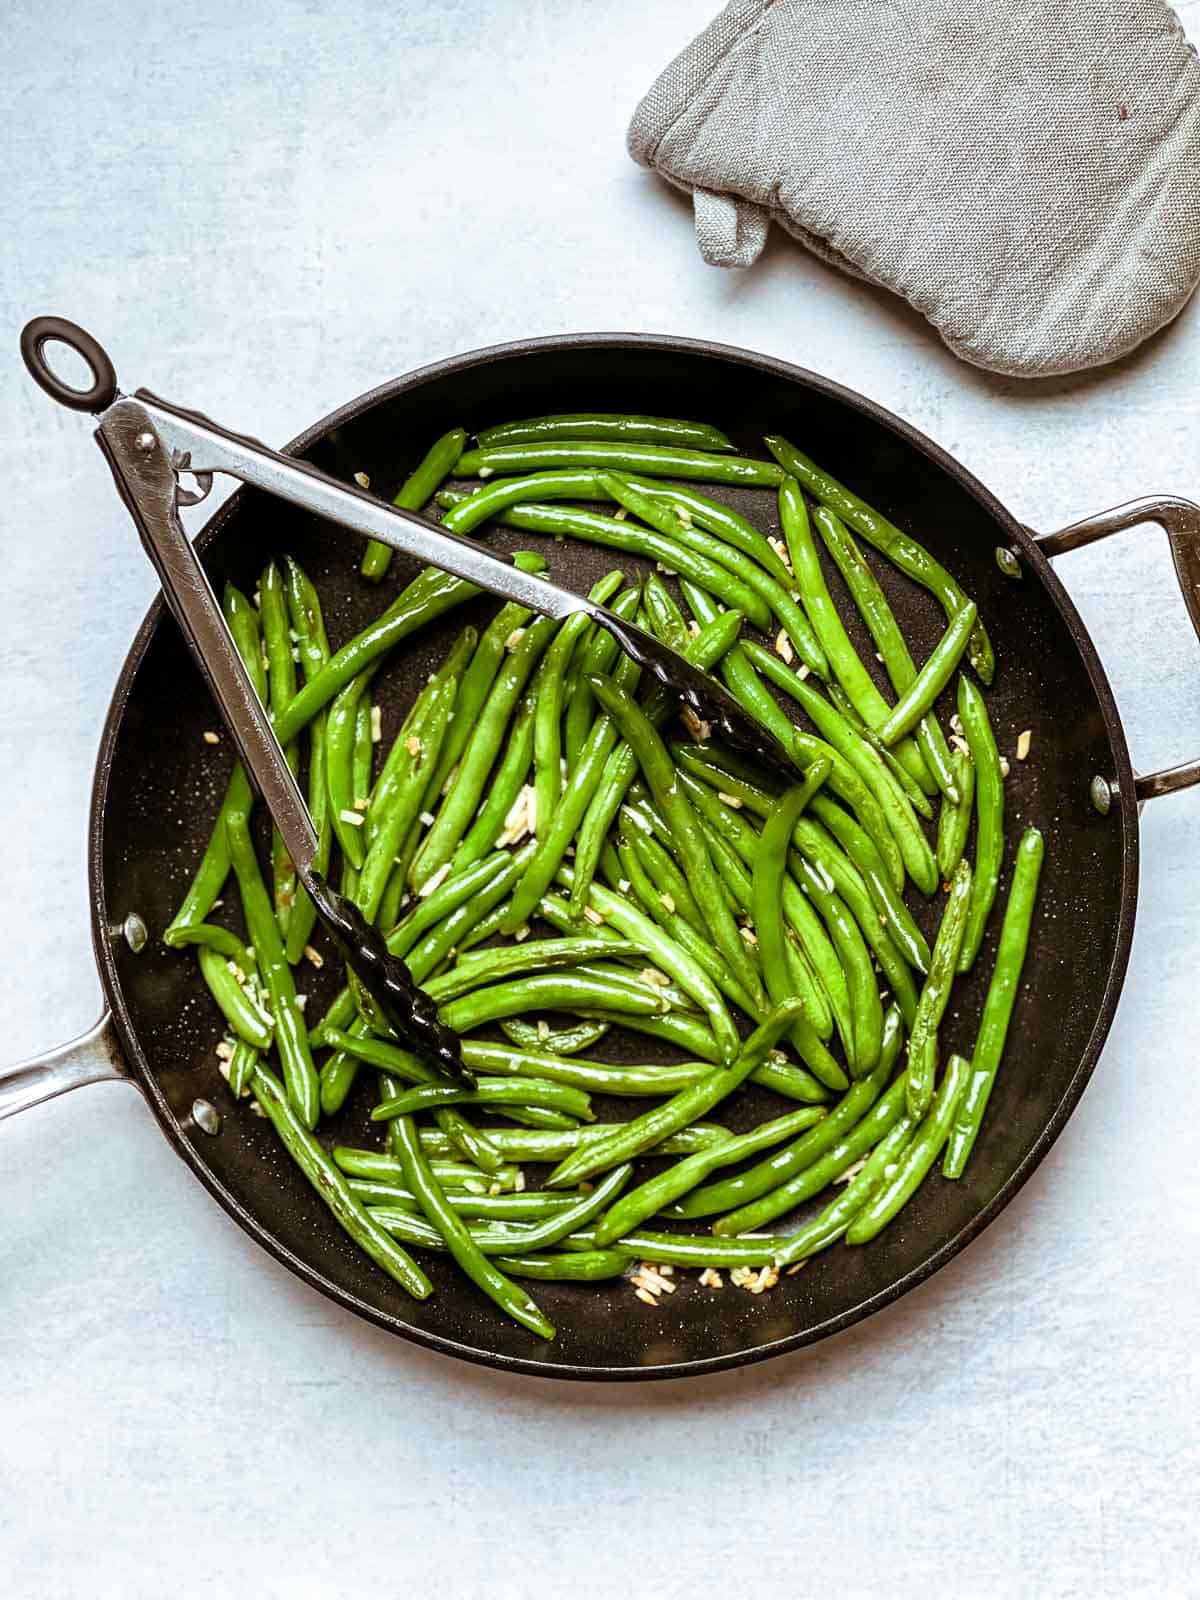 Tongs inserted in a frying pan with sauteed green beans and garlic and an oven mitt on the side.